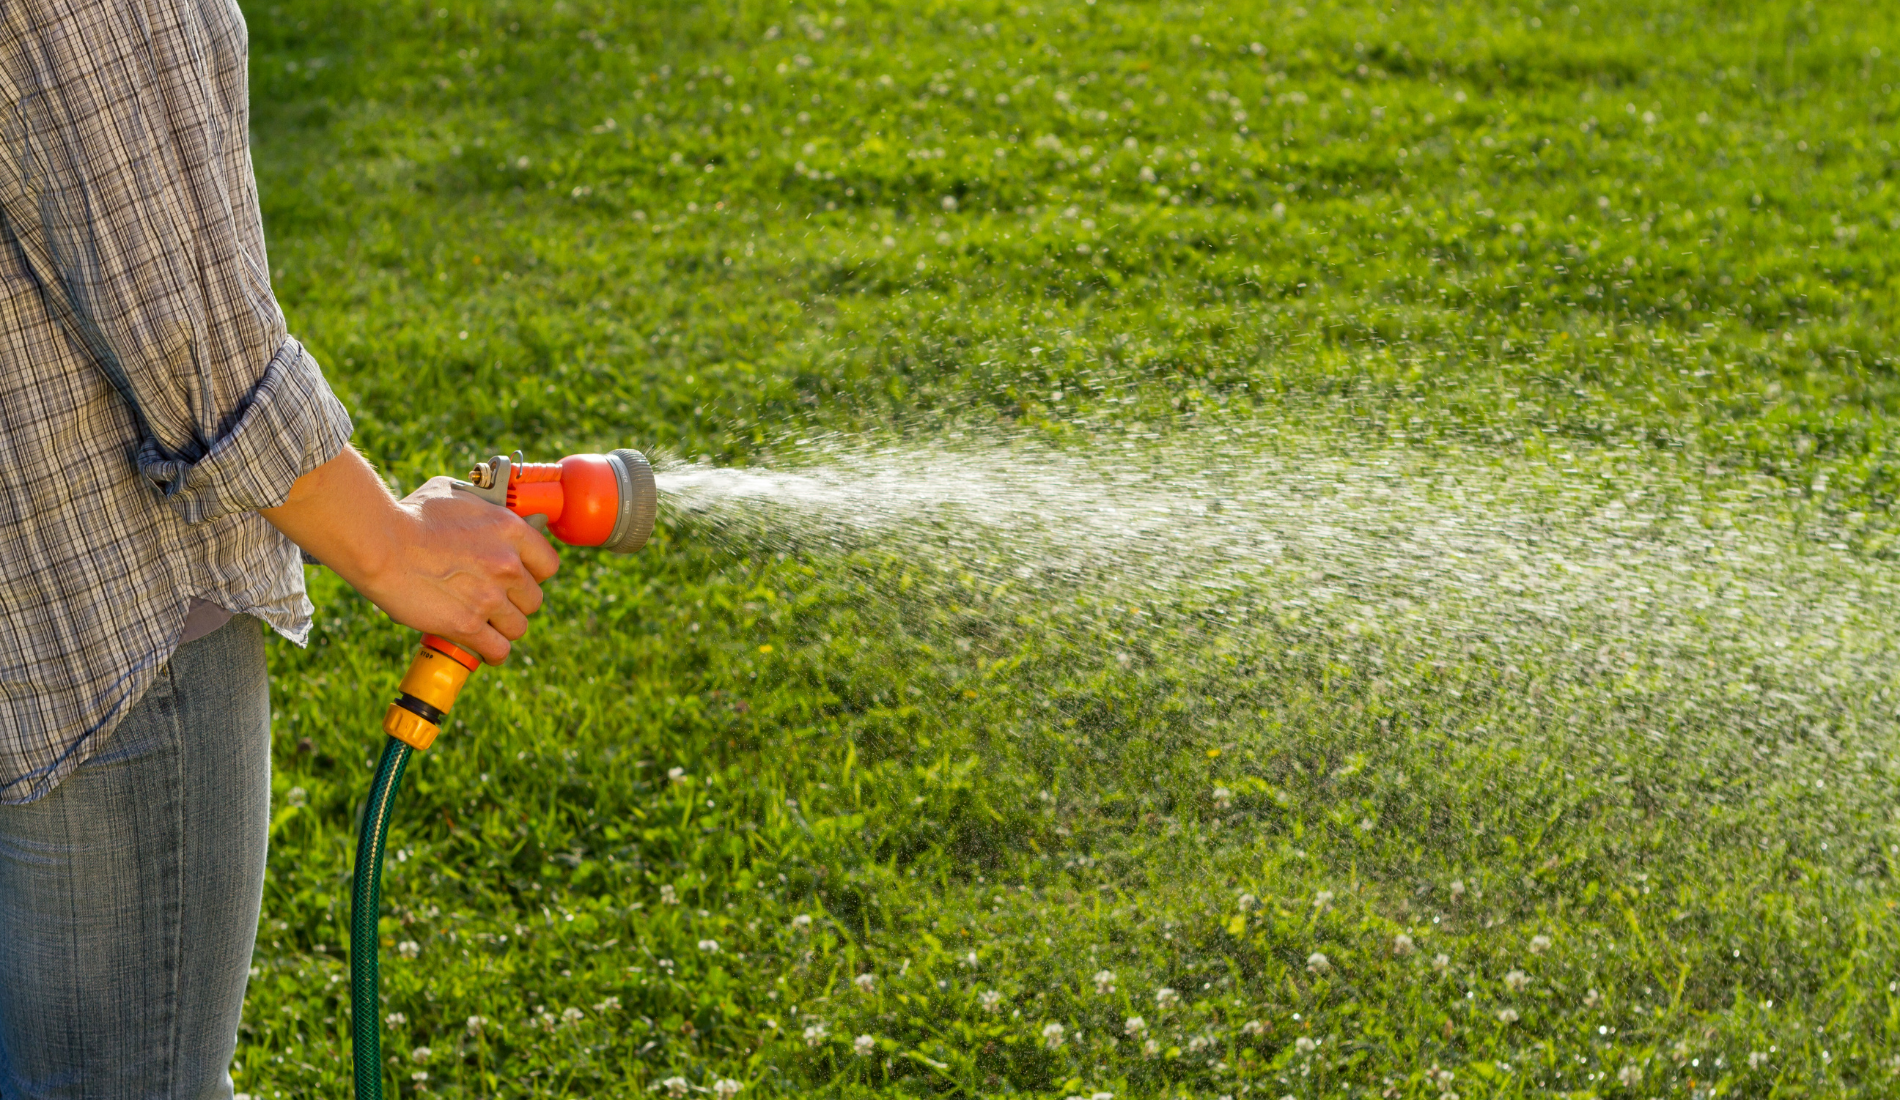 Woman watering the lawn with orange hose